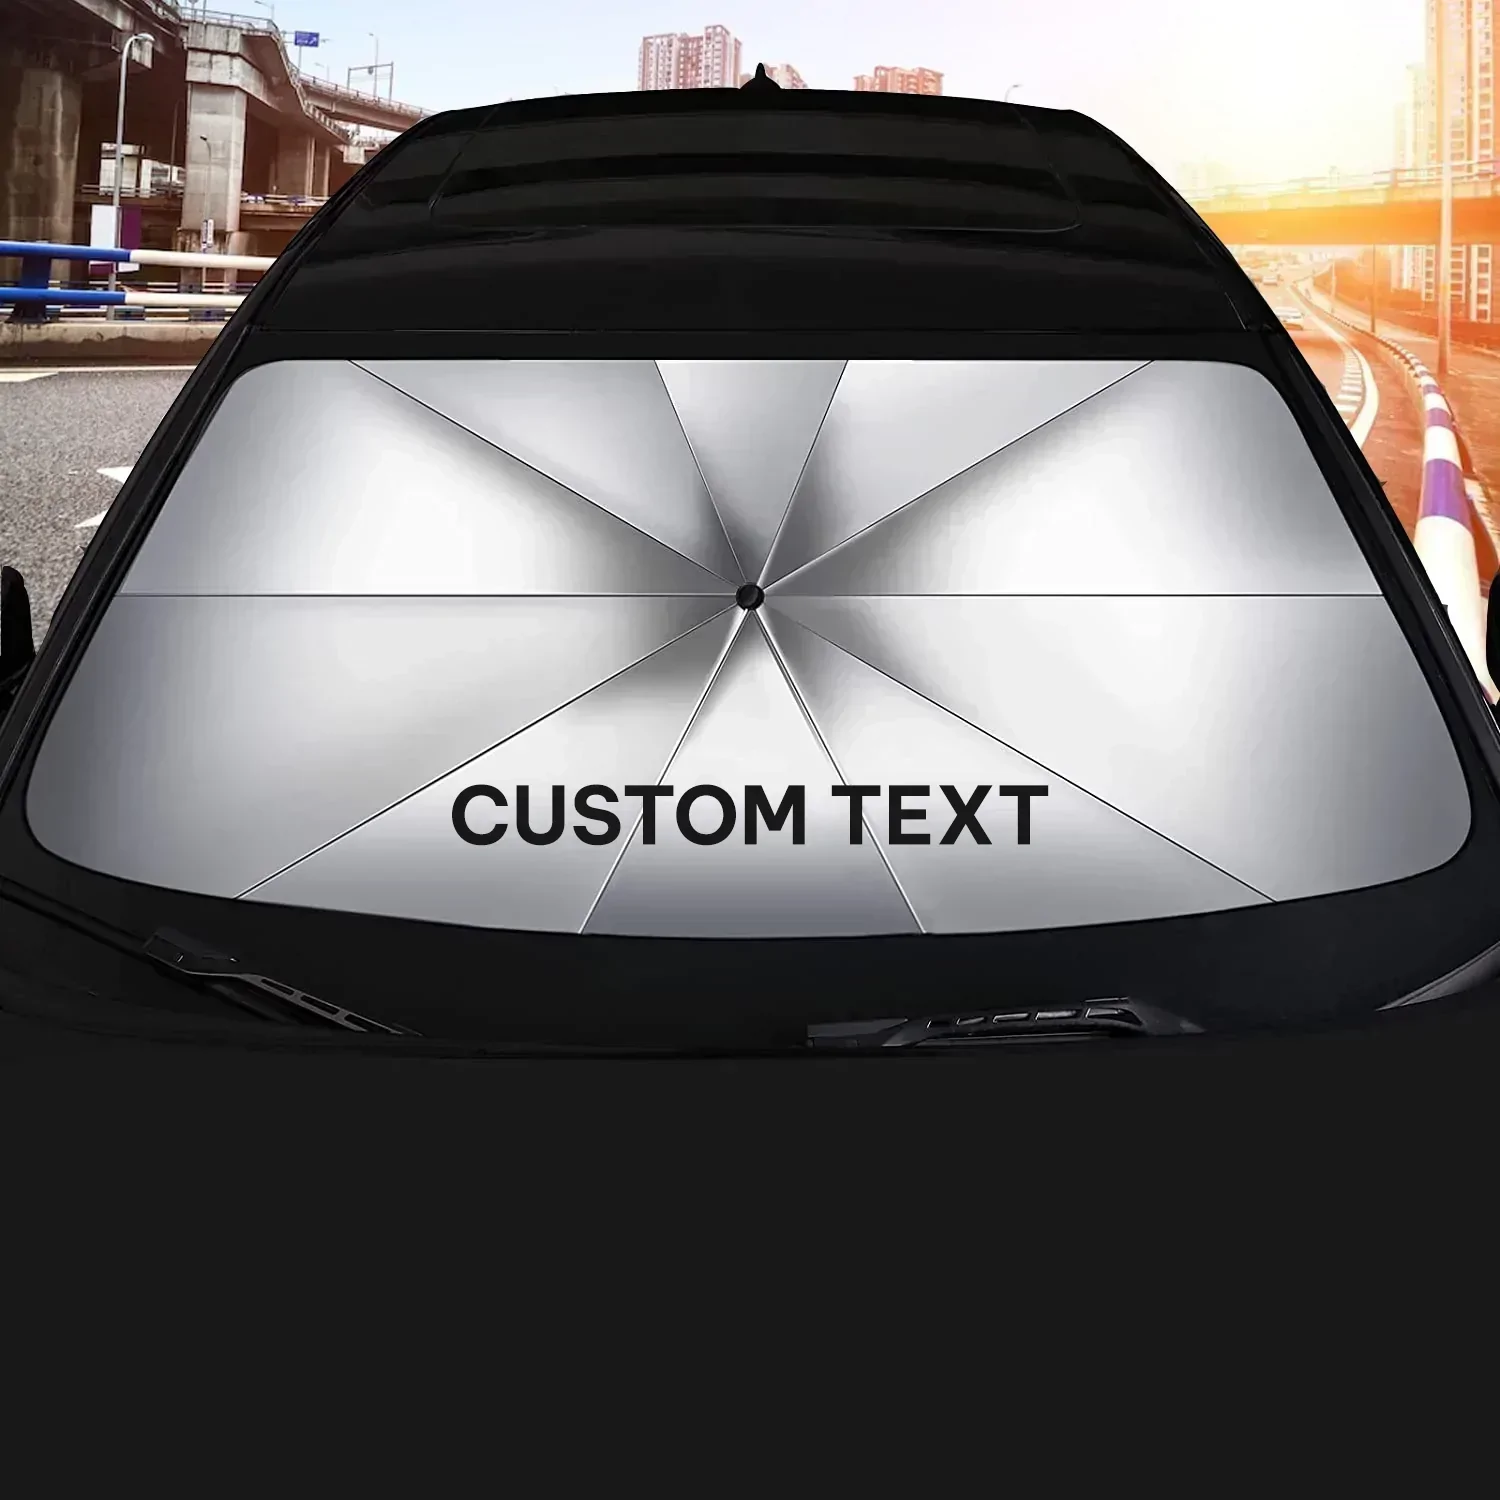 Car-Sunshade-Umbrella-Innovative-Protection-for-Your-Vehicle Delicate Leather